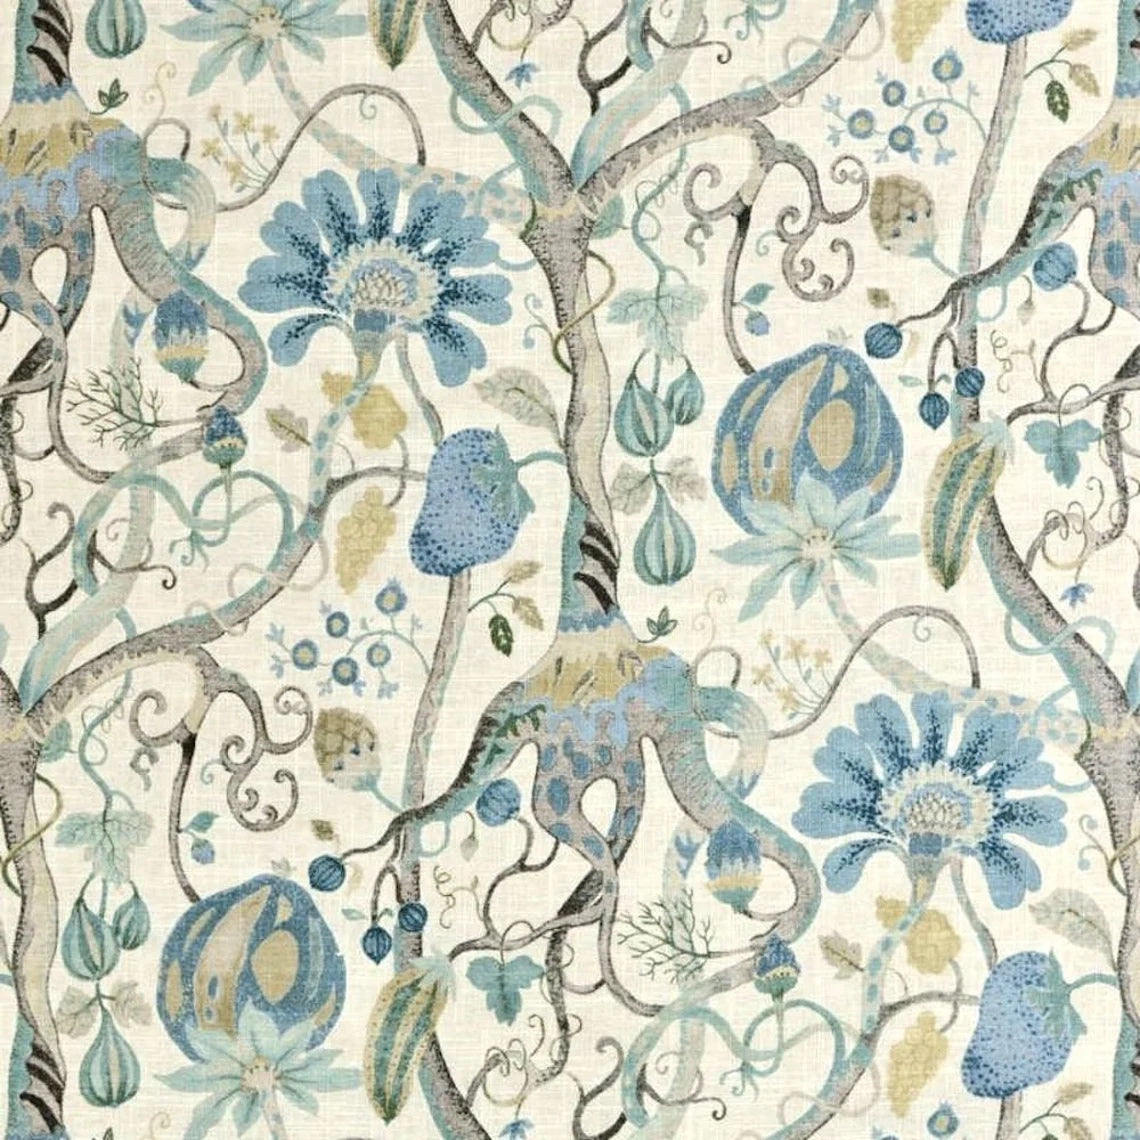 Duvet Cover in Tudor Antique Blue Jacobean Floral, Tree of Life, Large Scale Multi-Color